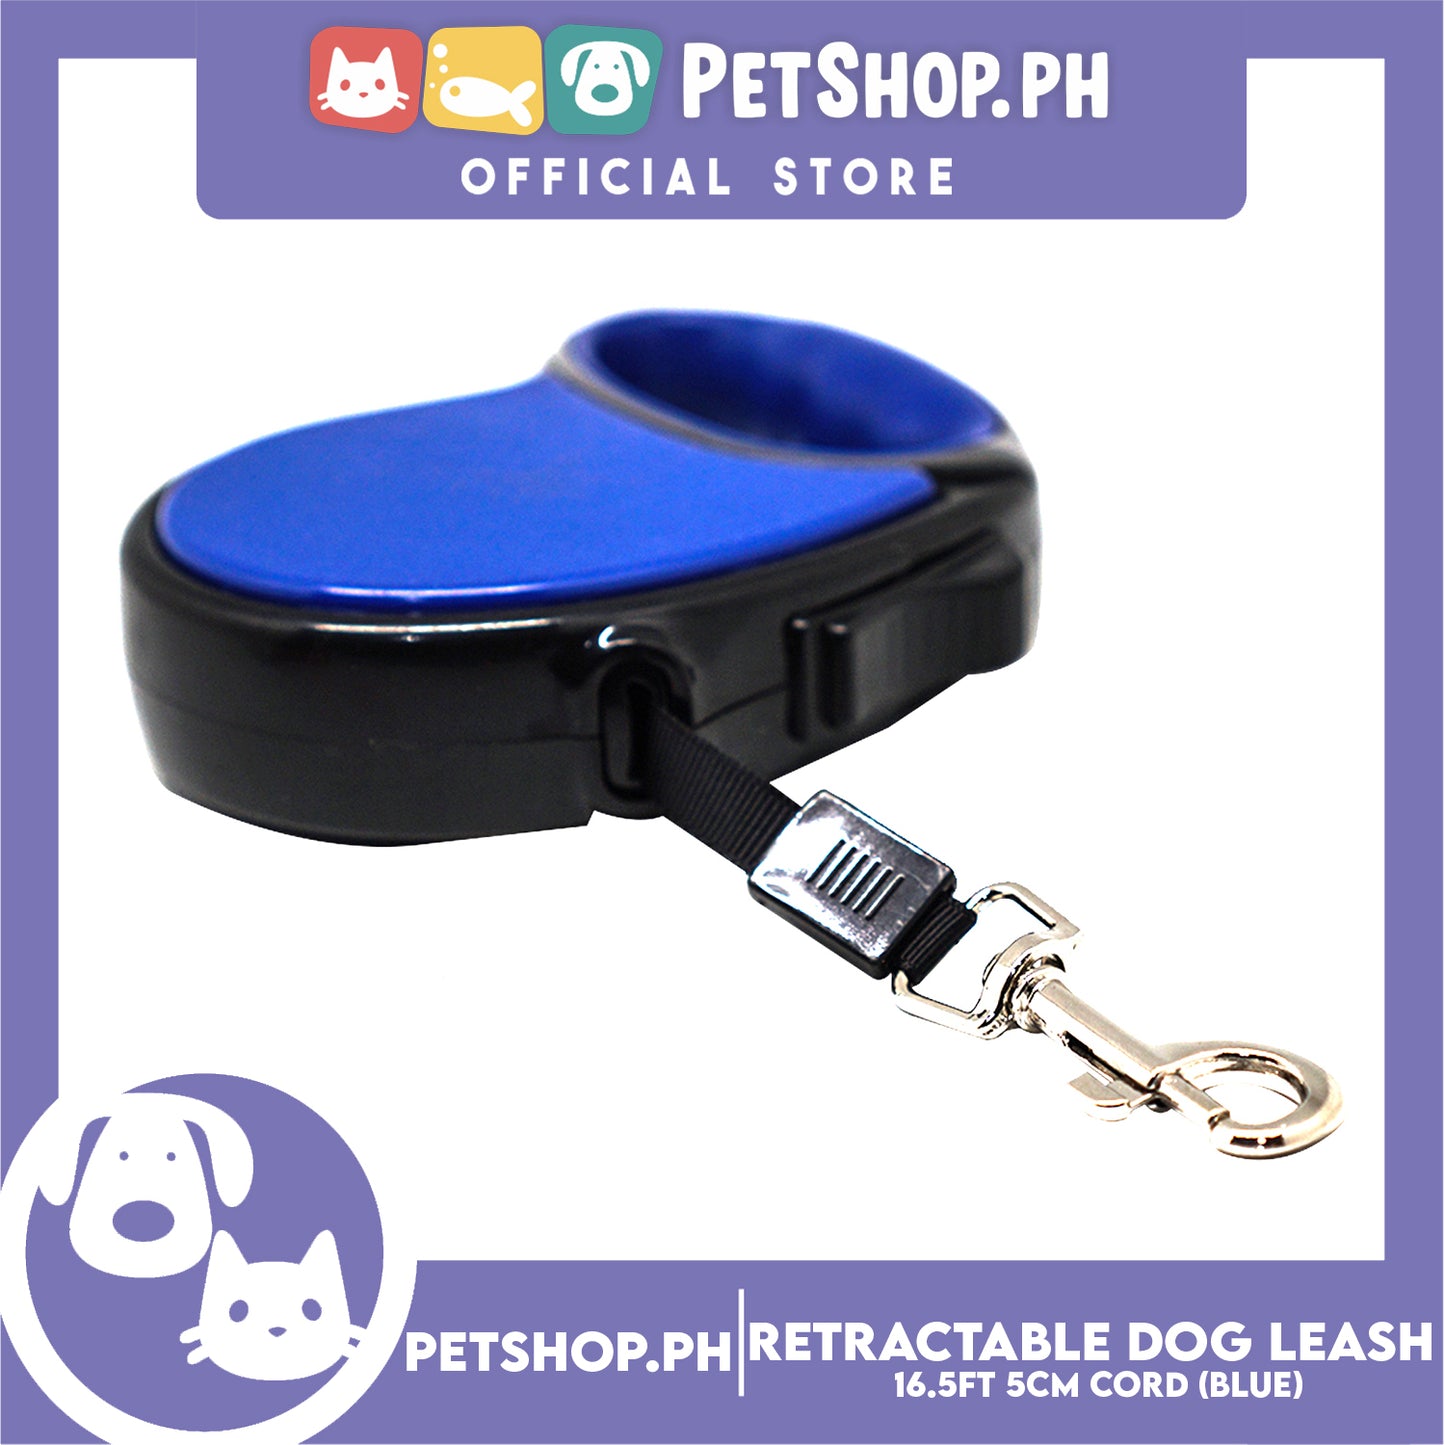 Retractable Dog Leash 16.5ft (5M) Cord with One Button Lock and Release for Up to 33lbs. Dog & Cats (Blue)